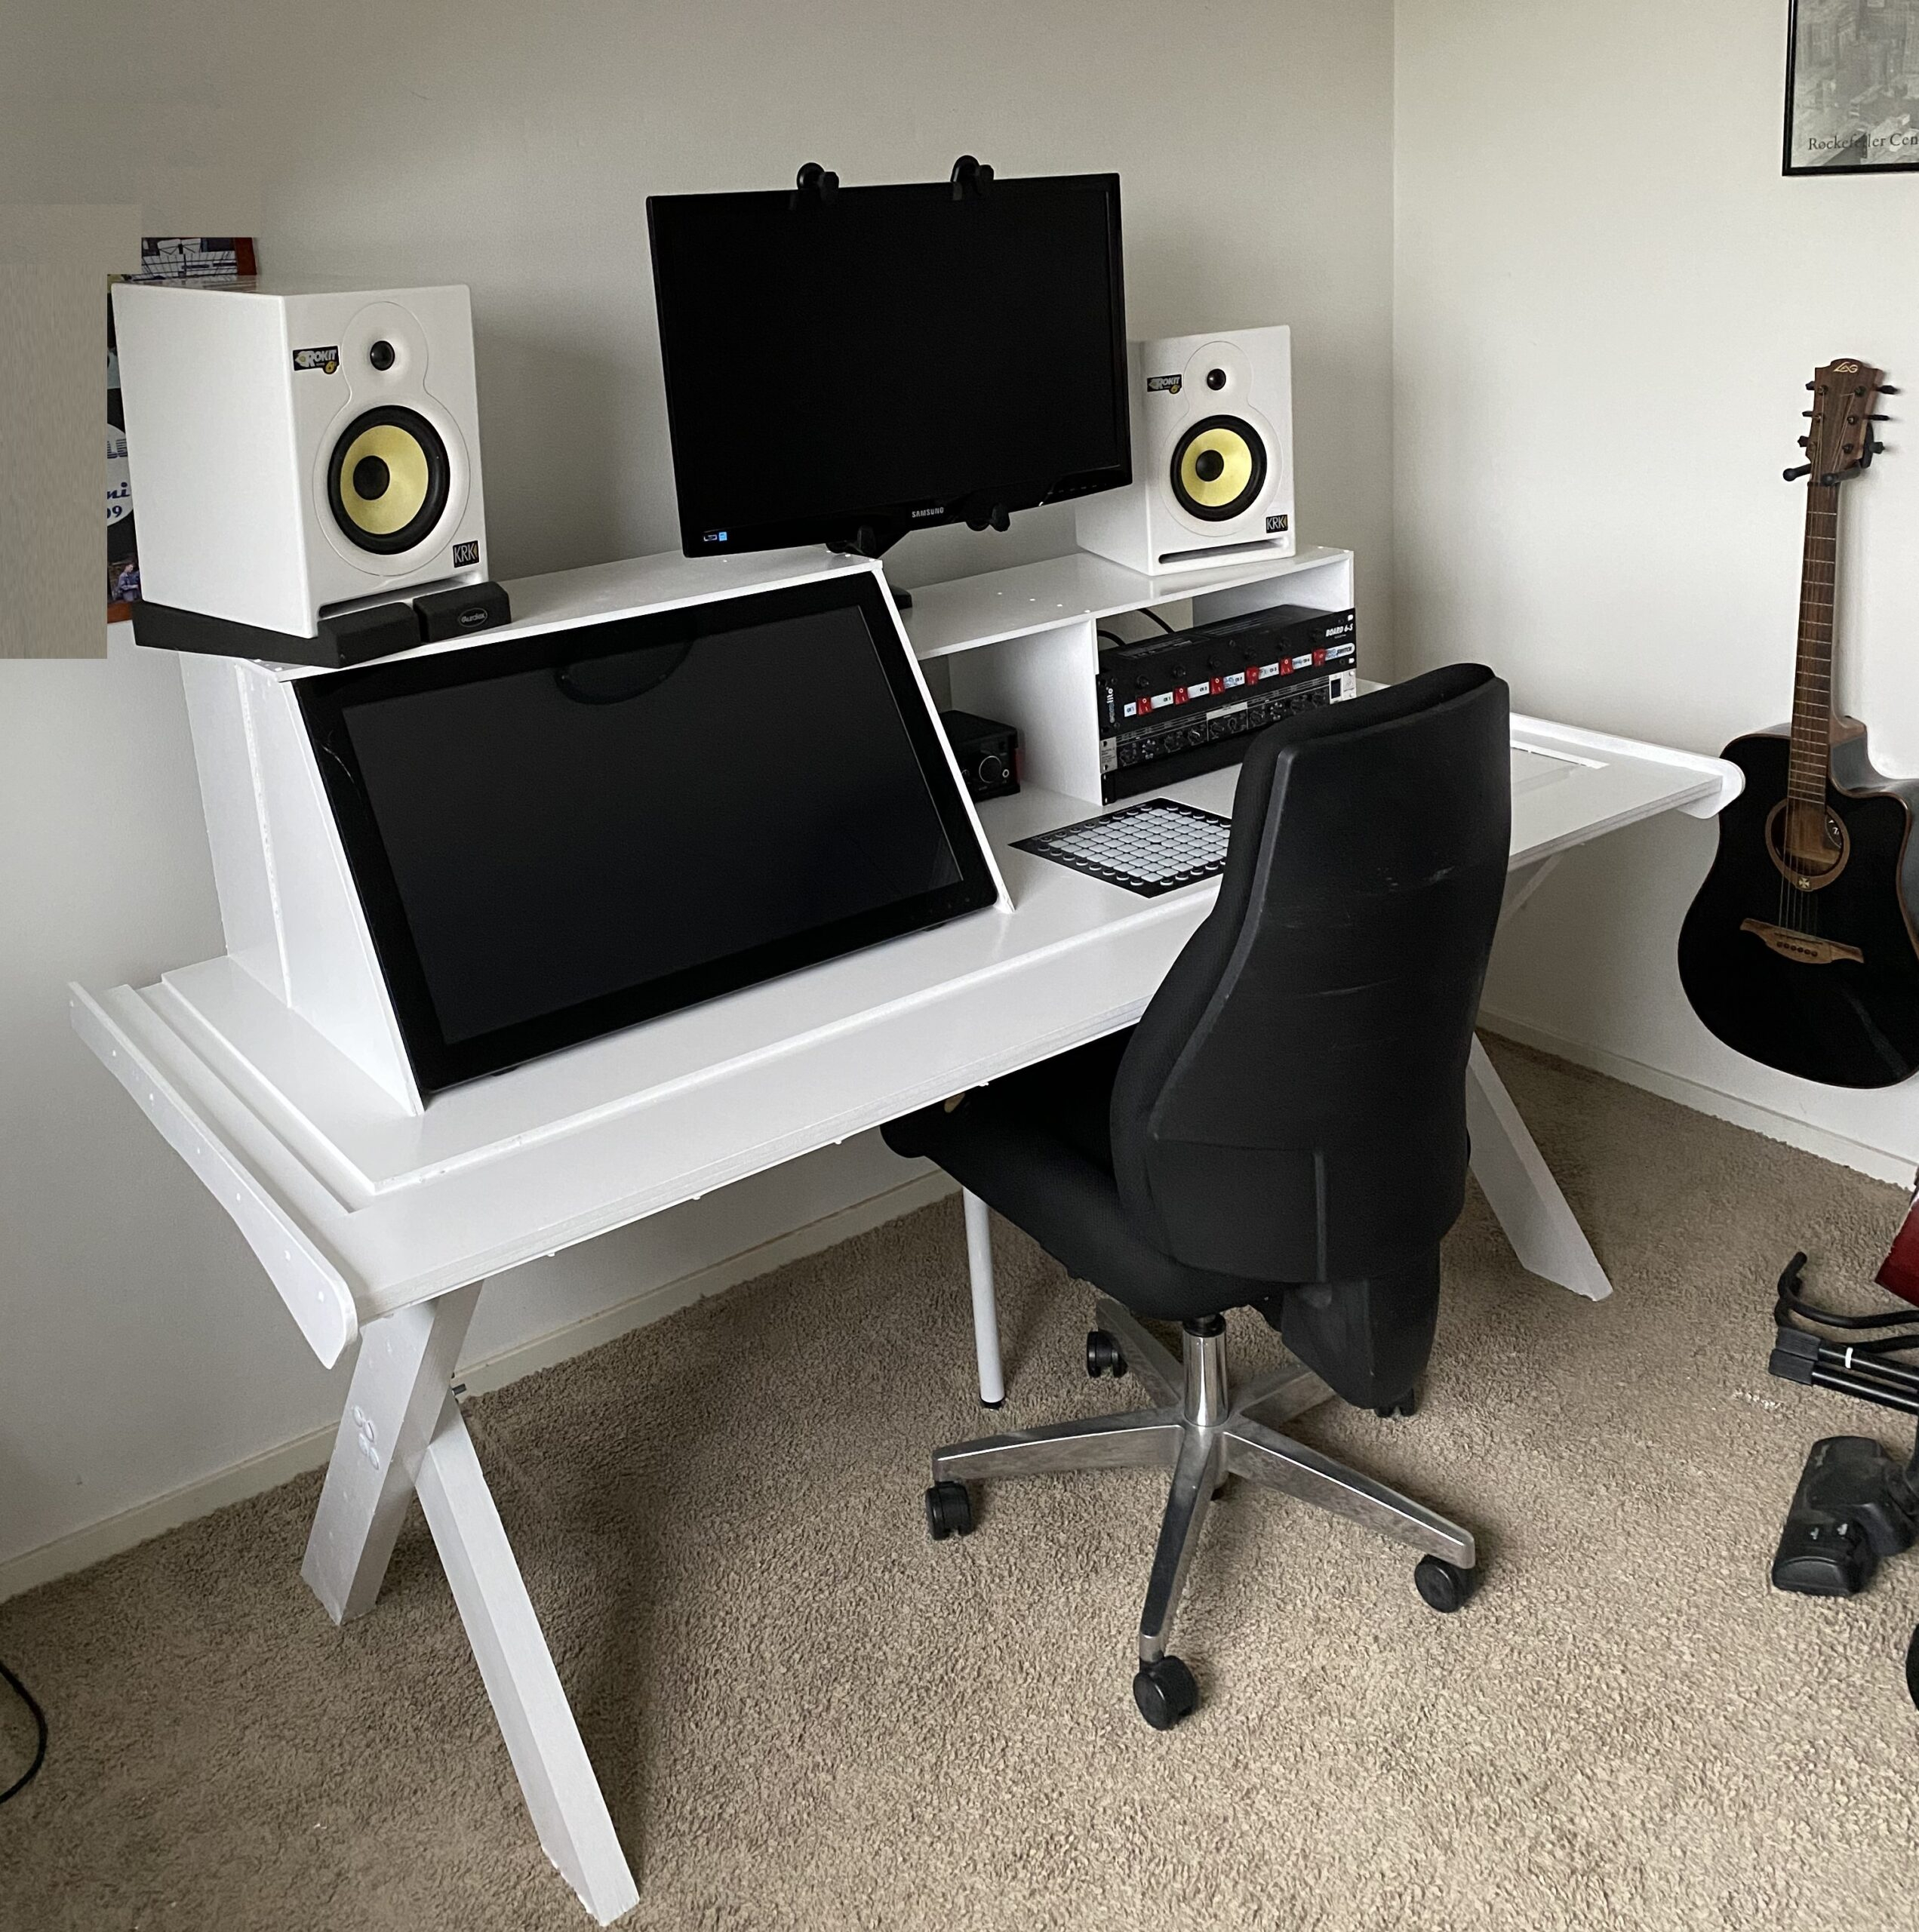 DIY Home studio furniture from MDF, by Martijn 